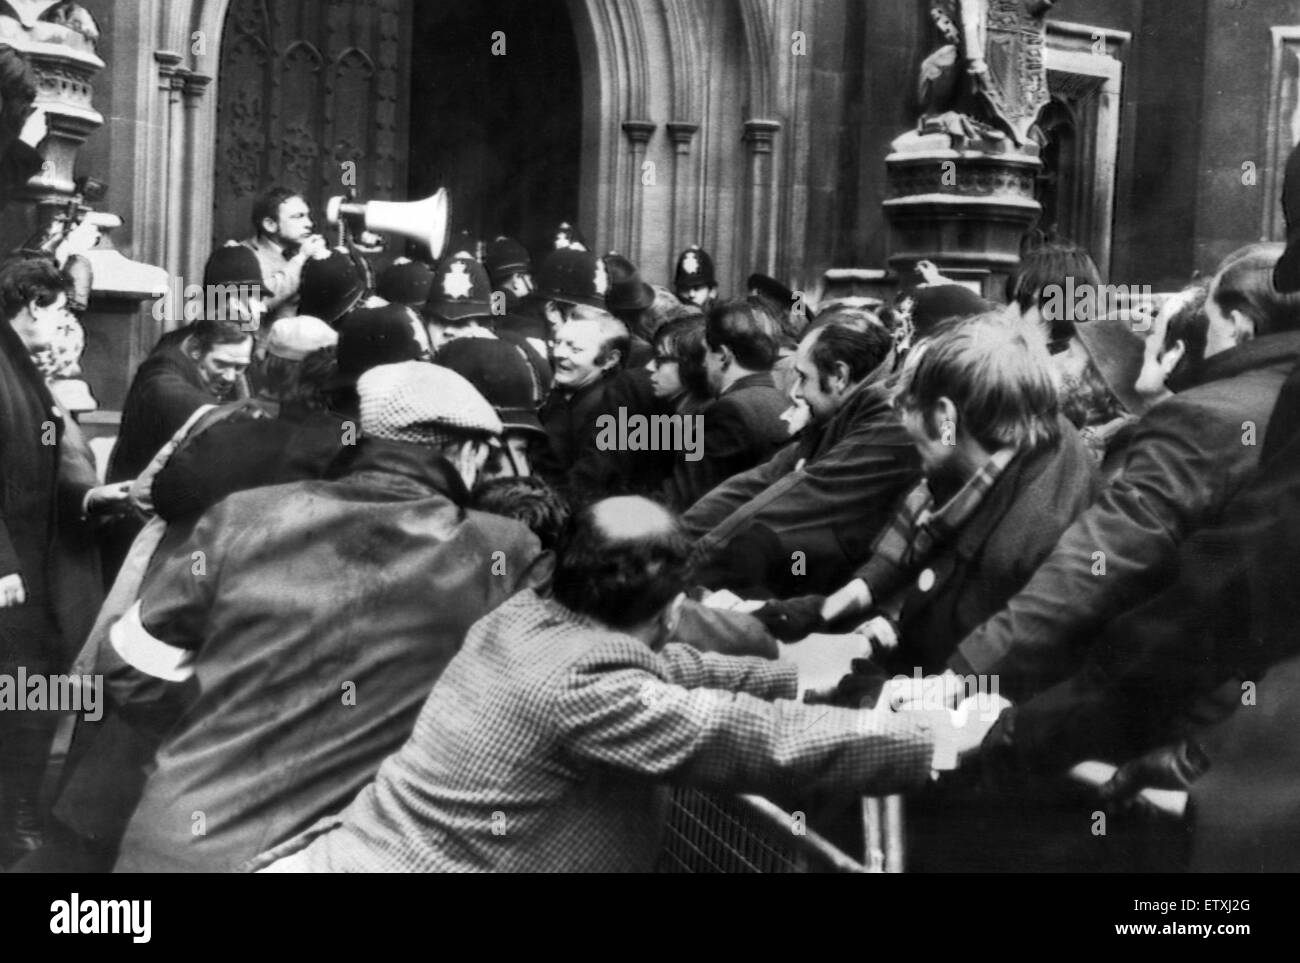 1972 Miners Strike. Demonstration outside House of Commons, London, Friday 18th February 1972. The demonstrators from a number of unions and students massed outside the commons in an attempt to lobby MPs. Stock Photo